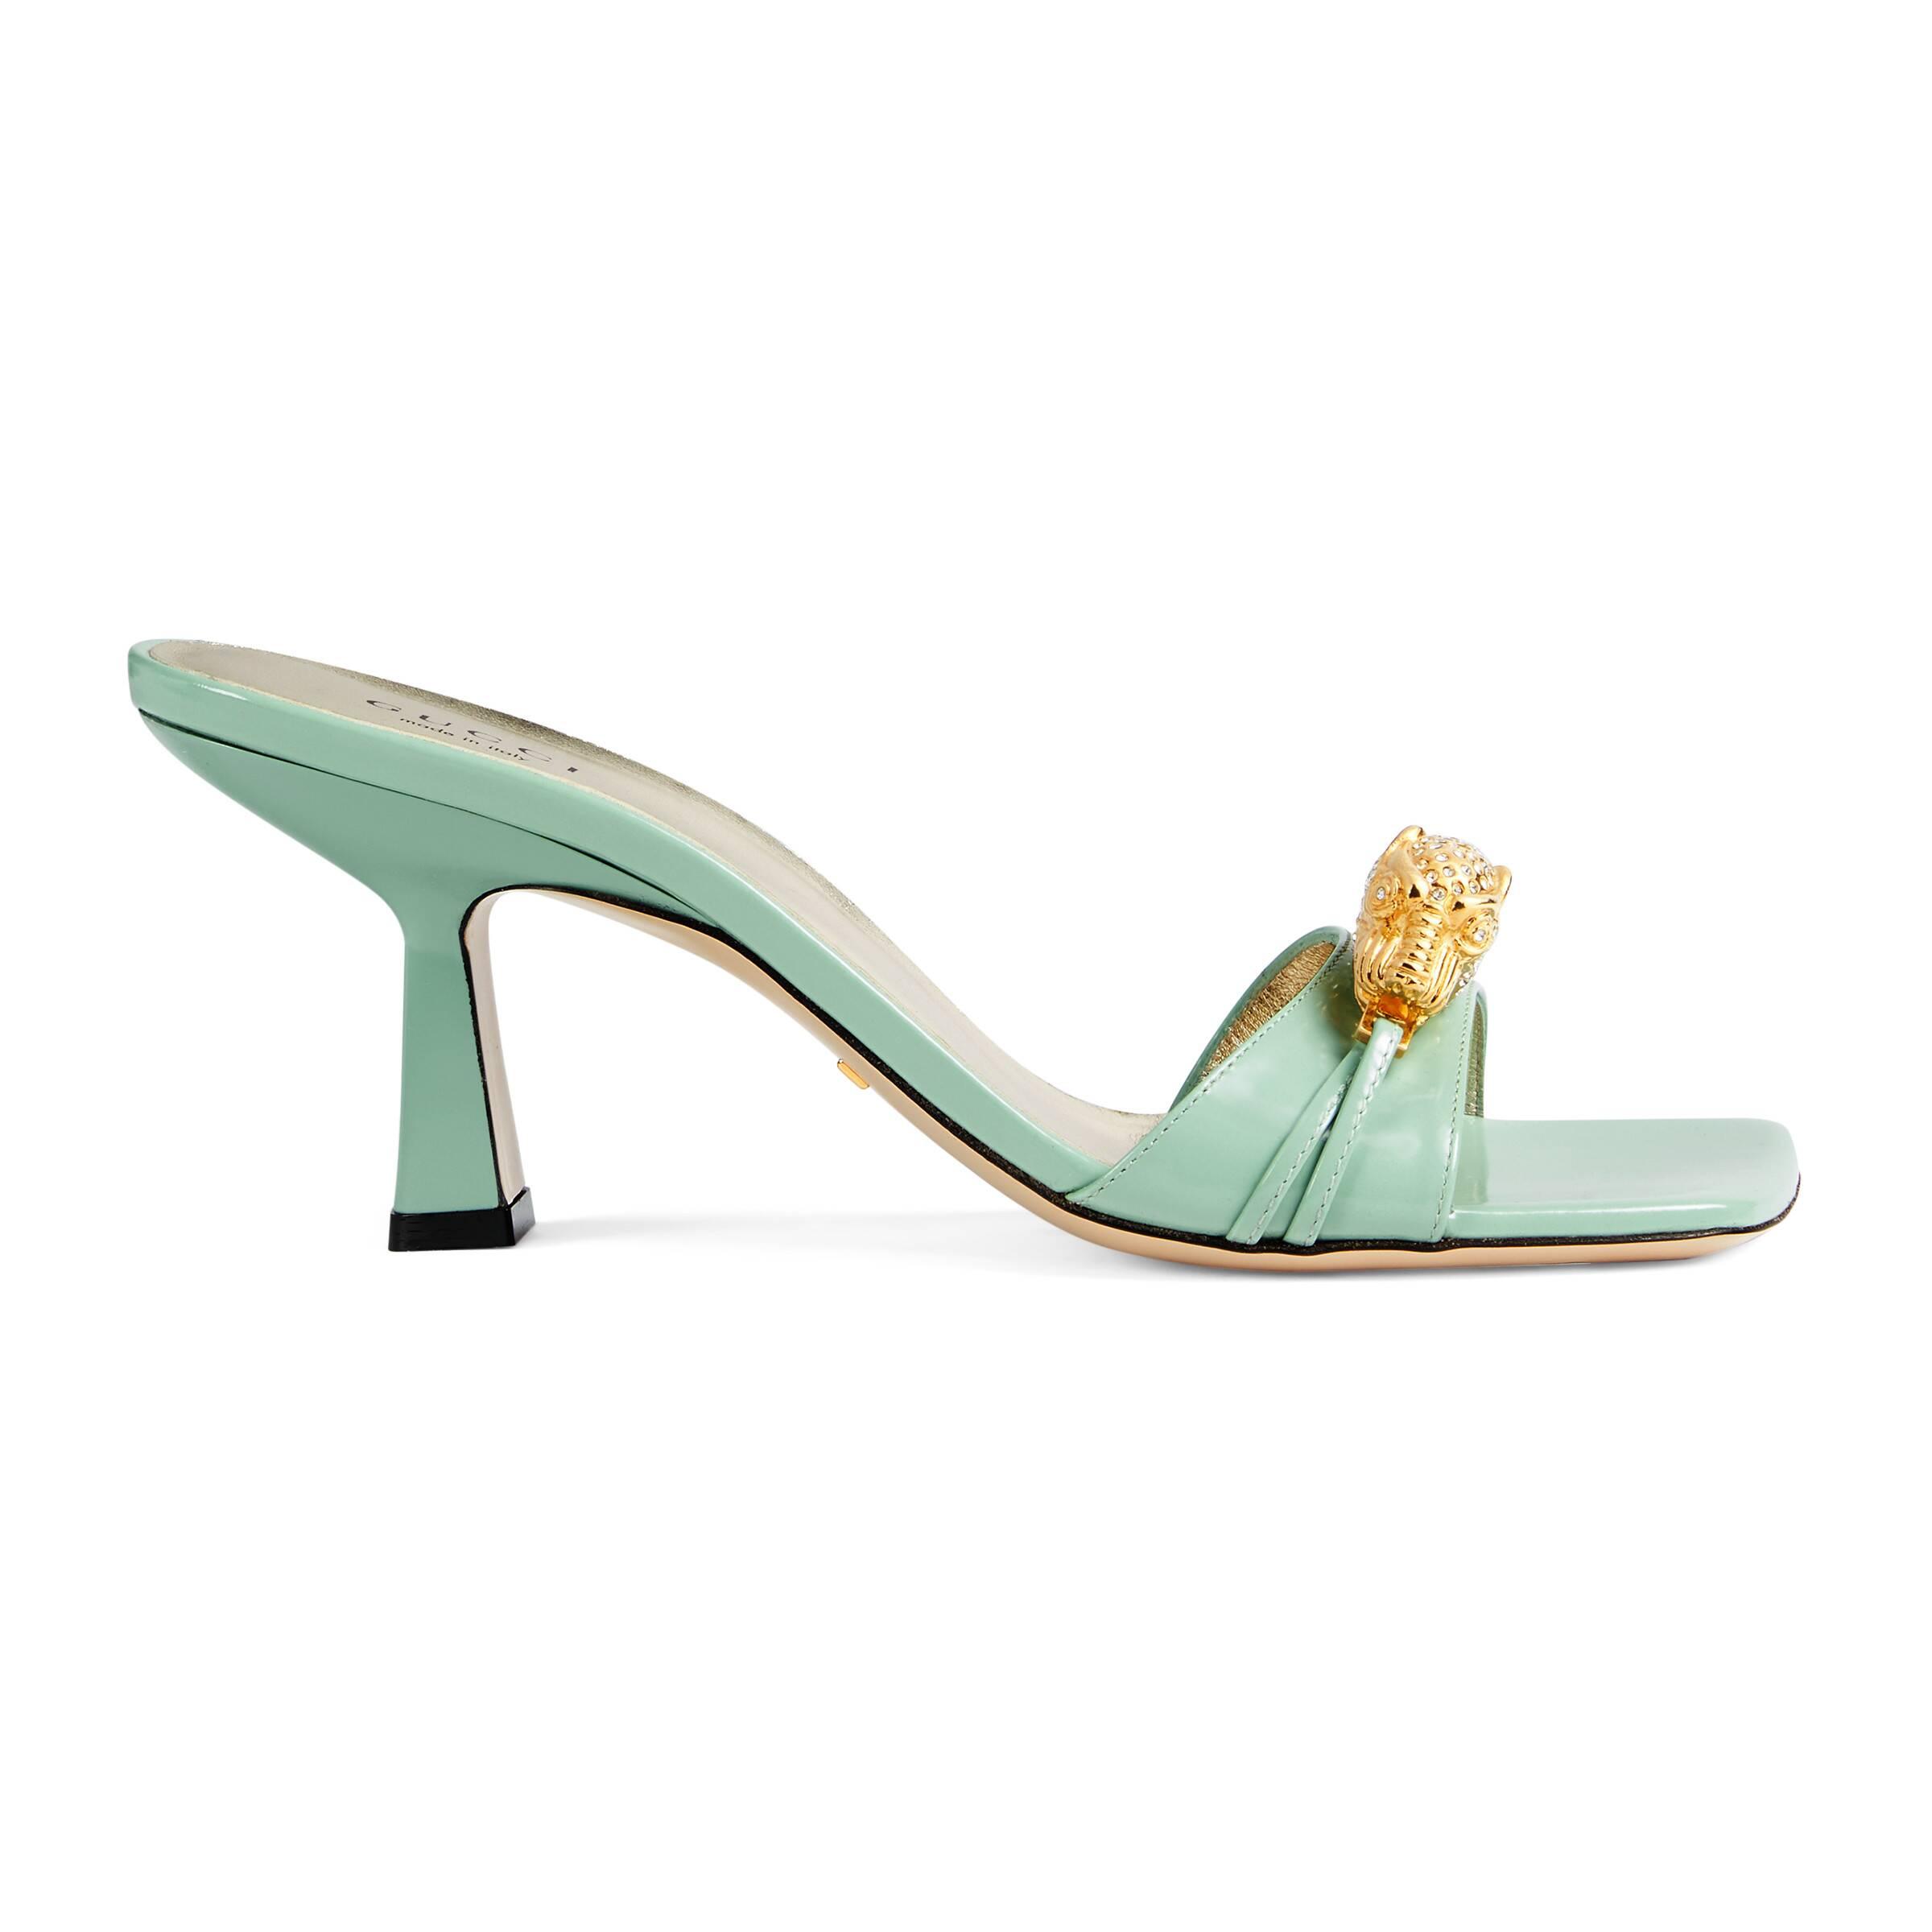 Gucci Leather Dora Tiger Sandals 75 in Light Green (Green) - Lyst